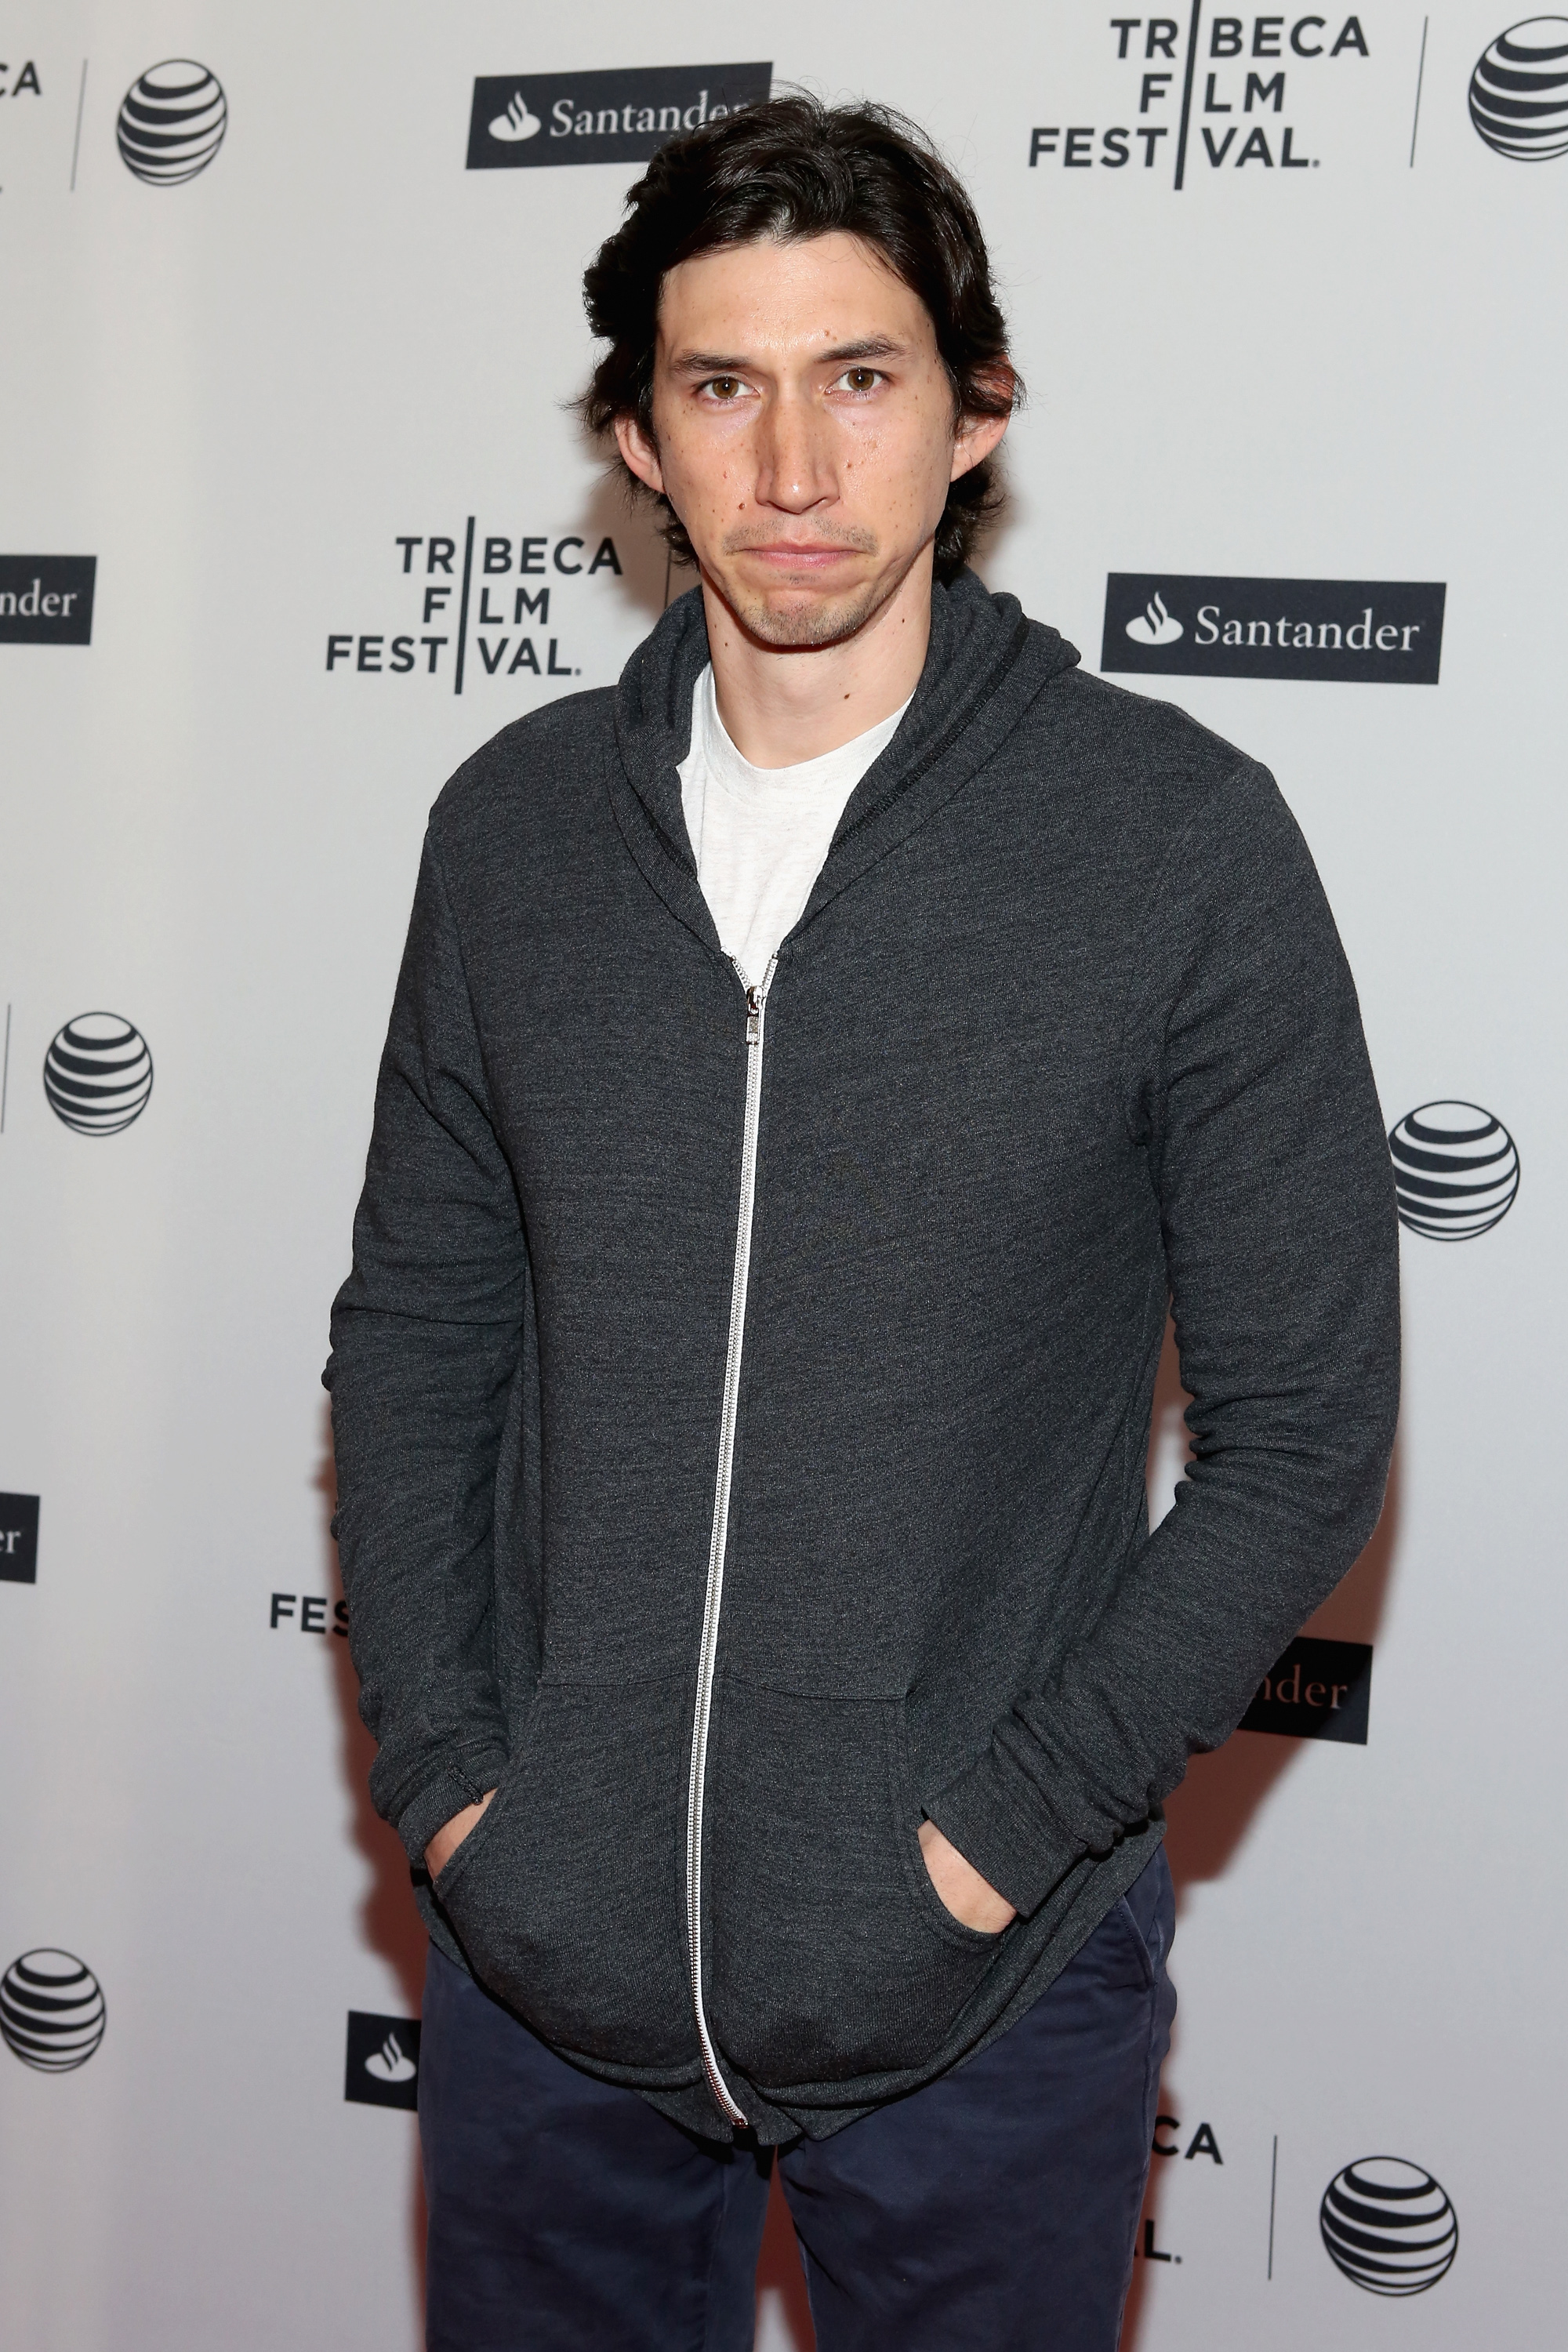 Adam Driver
                              The Girls actor was reported by Variety back in February to have been cast to play the villain in Episode VII.